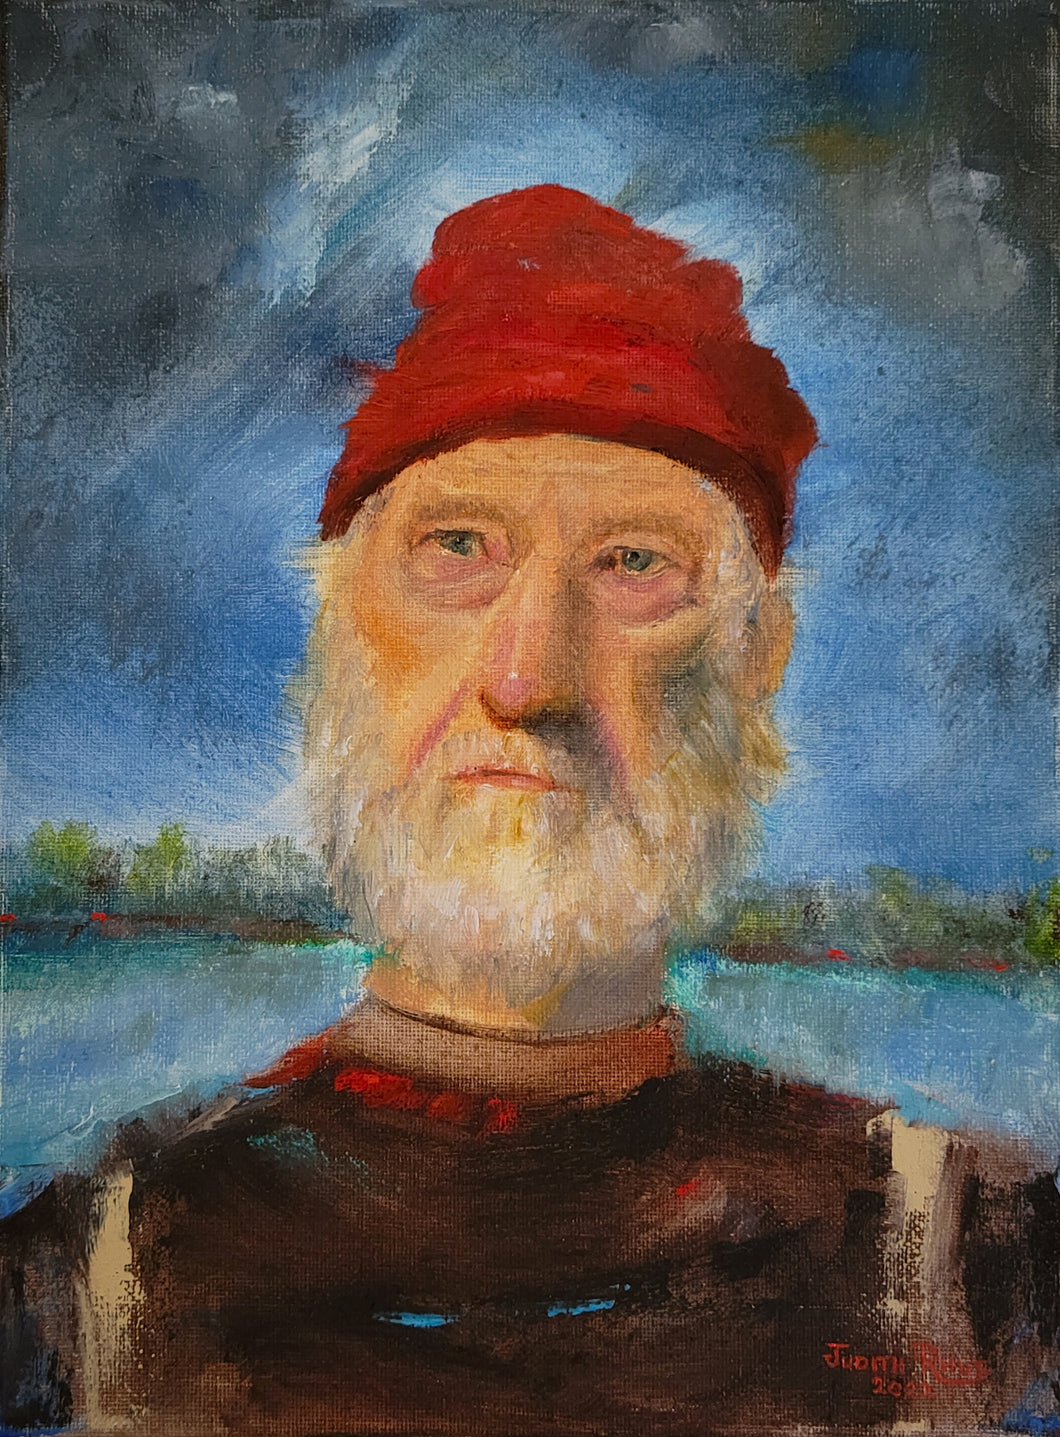 Stronger Than The Storm - original oil painting portrait man male old wise beard fisherman fishing storm weather clouds face canvas artwork wall home living decor art